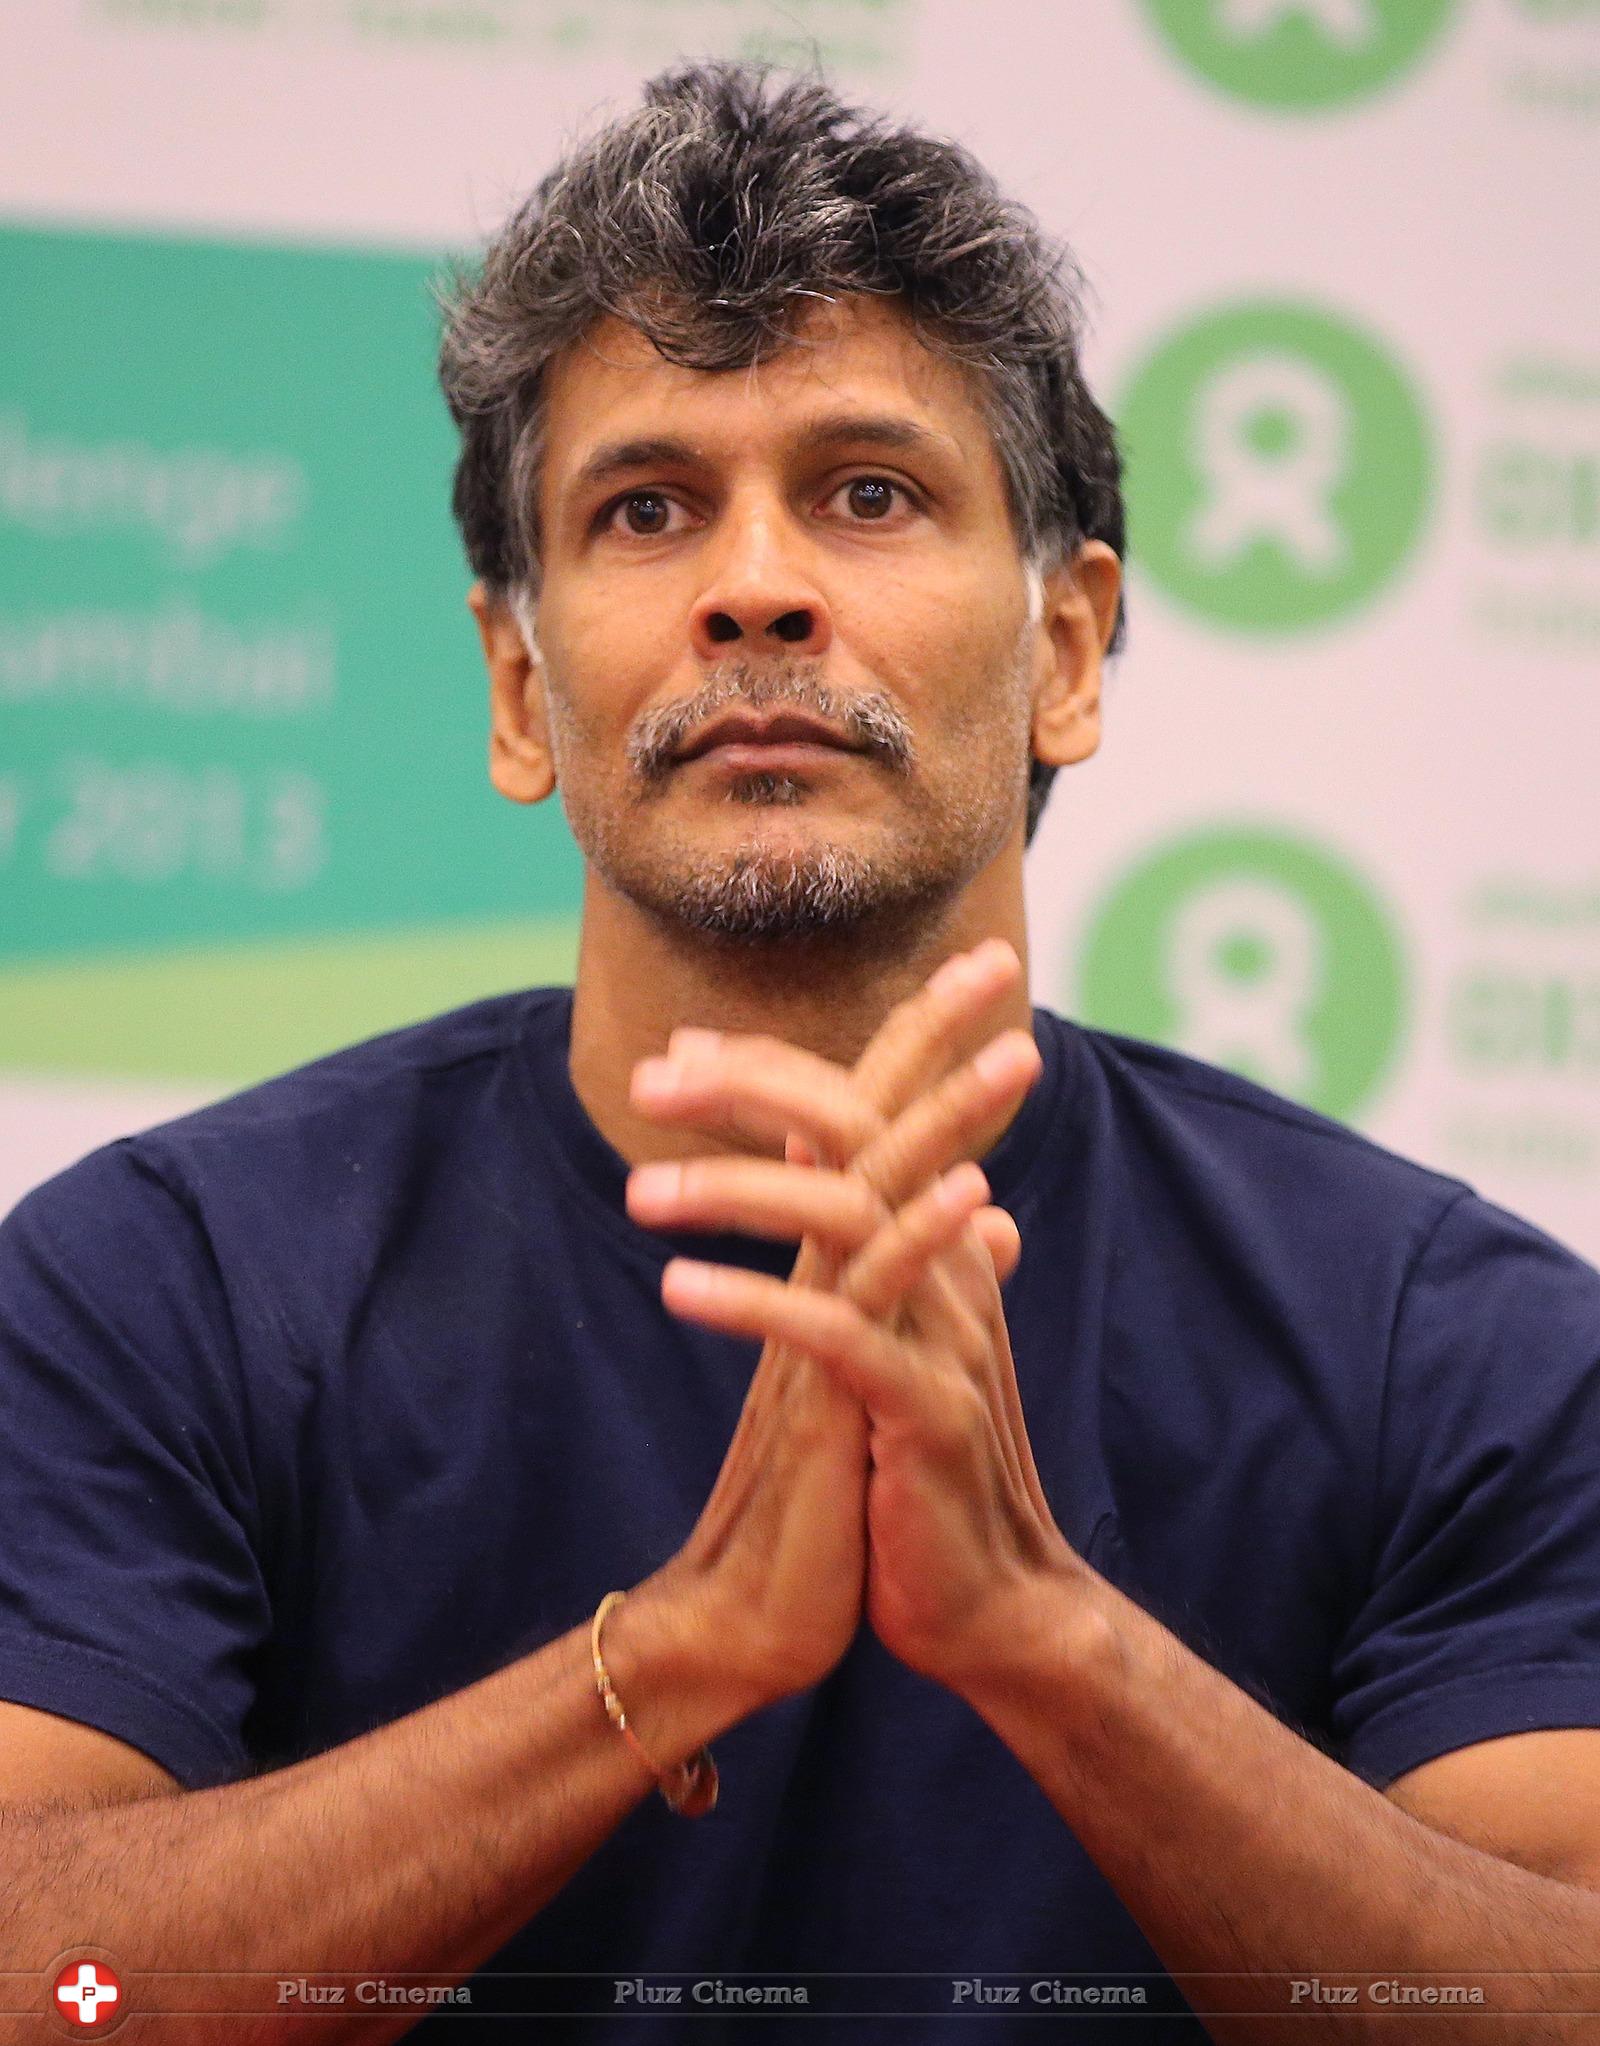 Milind Soman - Press conference to announce Oxfam Trailwalker, a 100km fund raising run Photos | Picture 582833